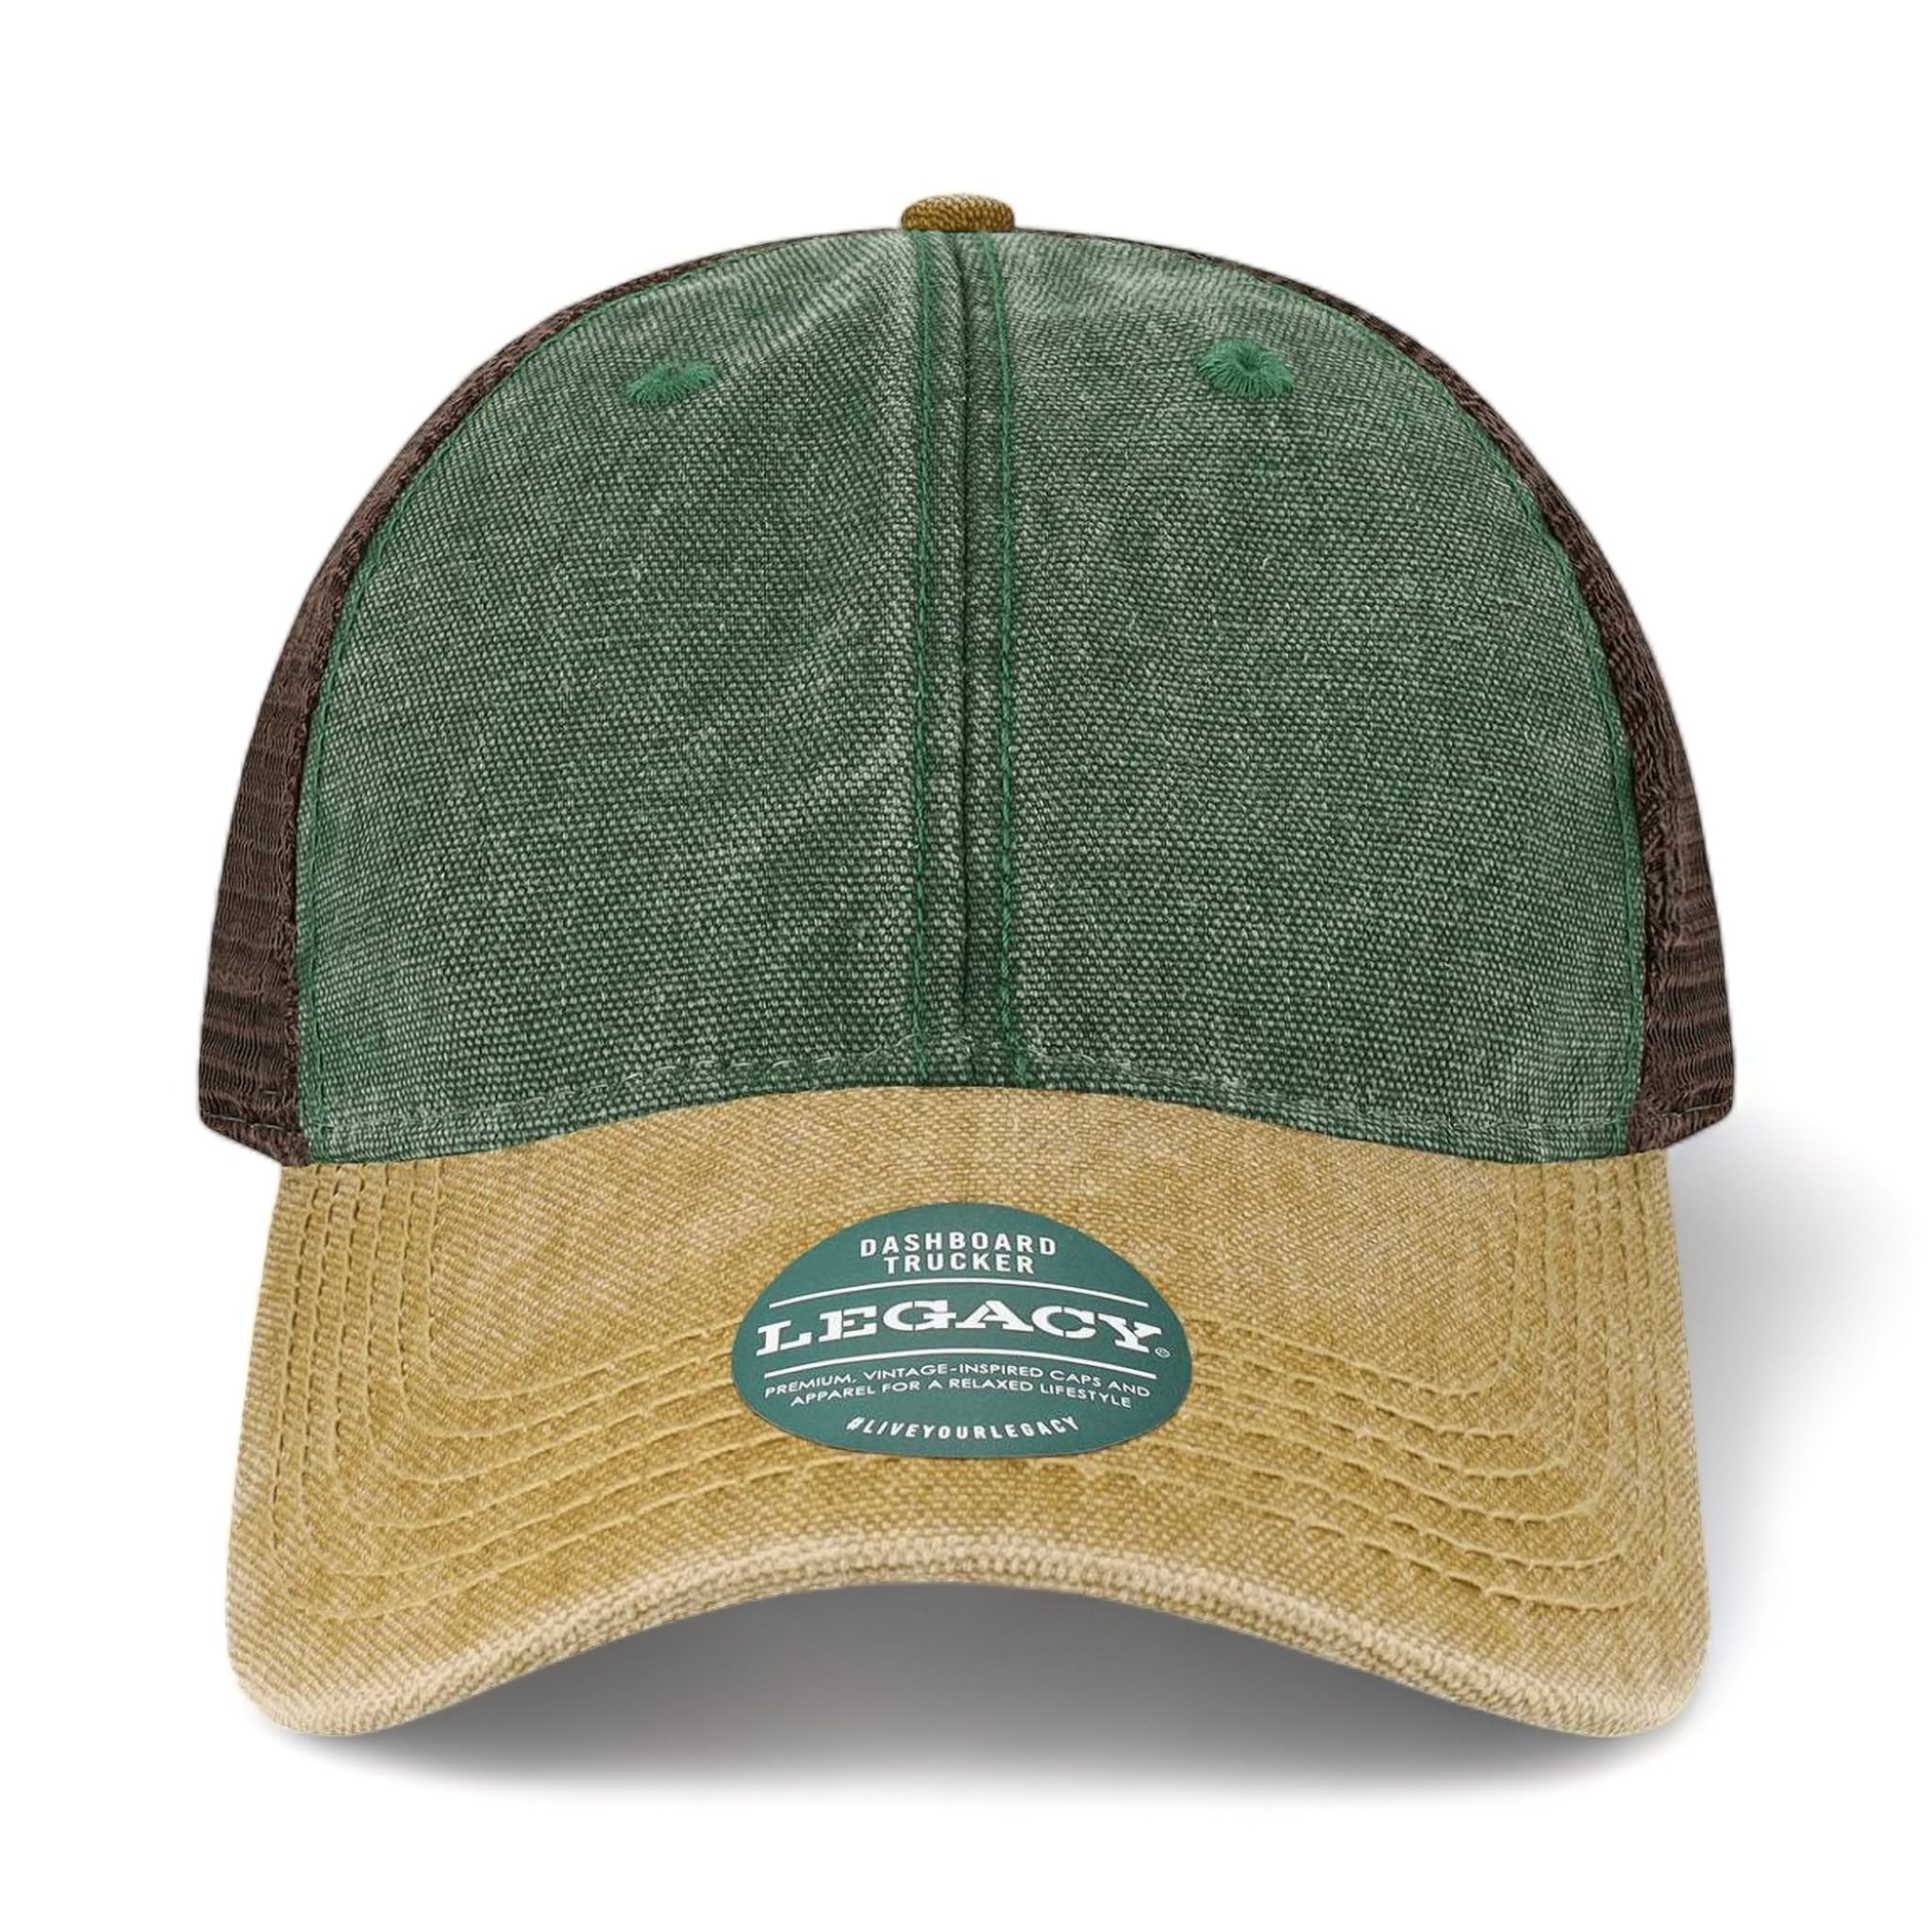 Front view of LEGACY DTA custom hat in green, camel and brown